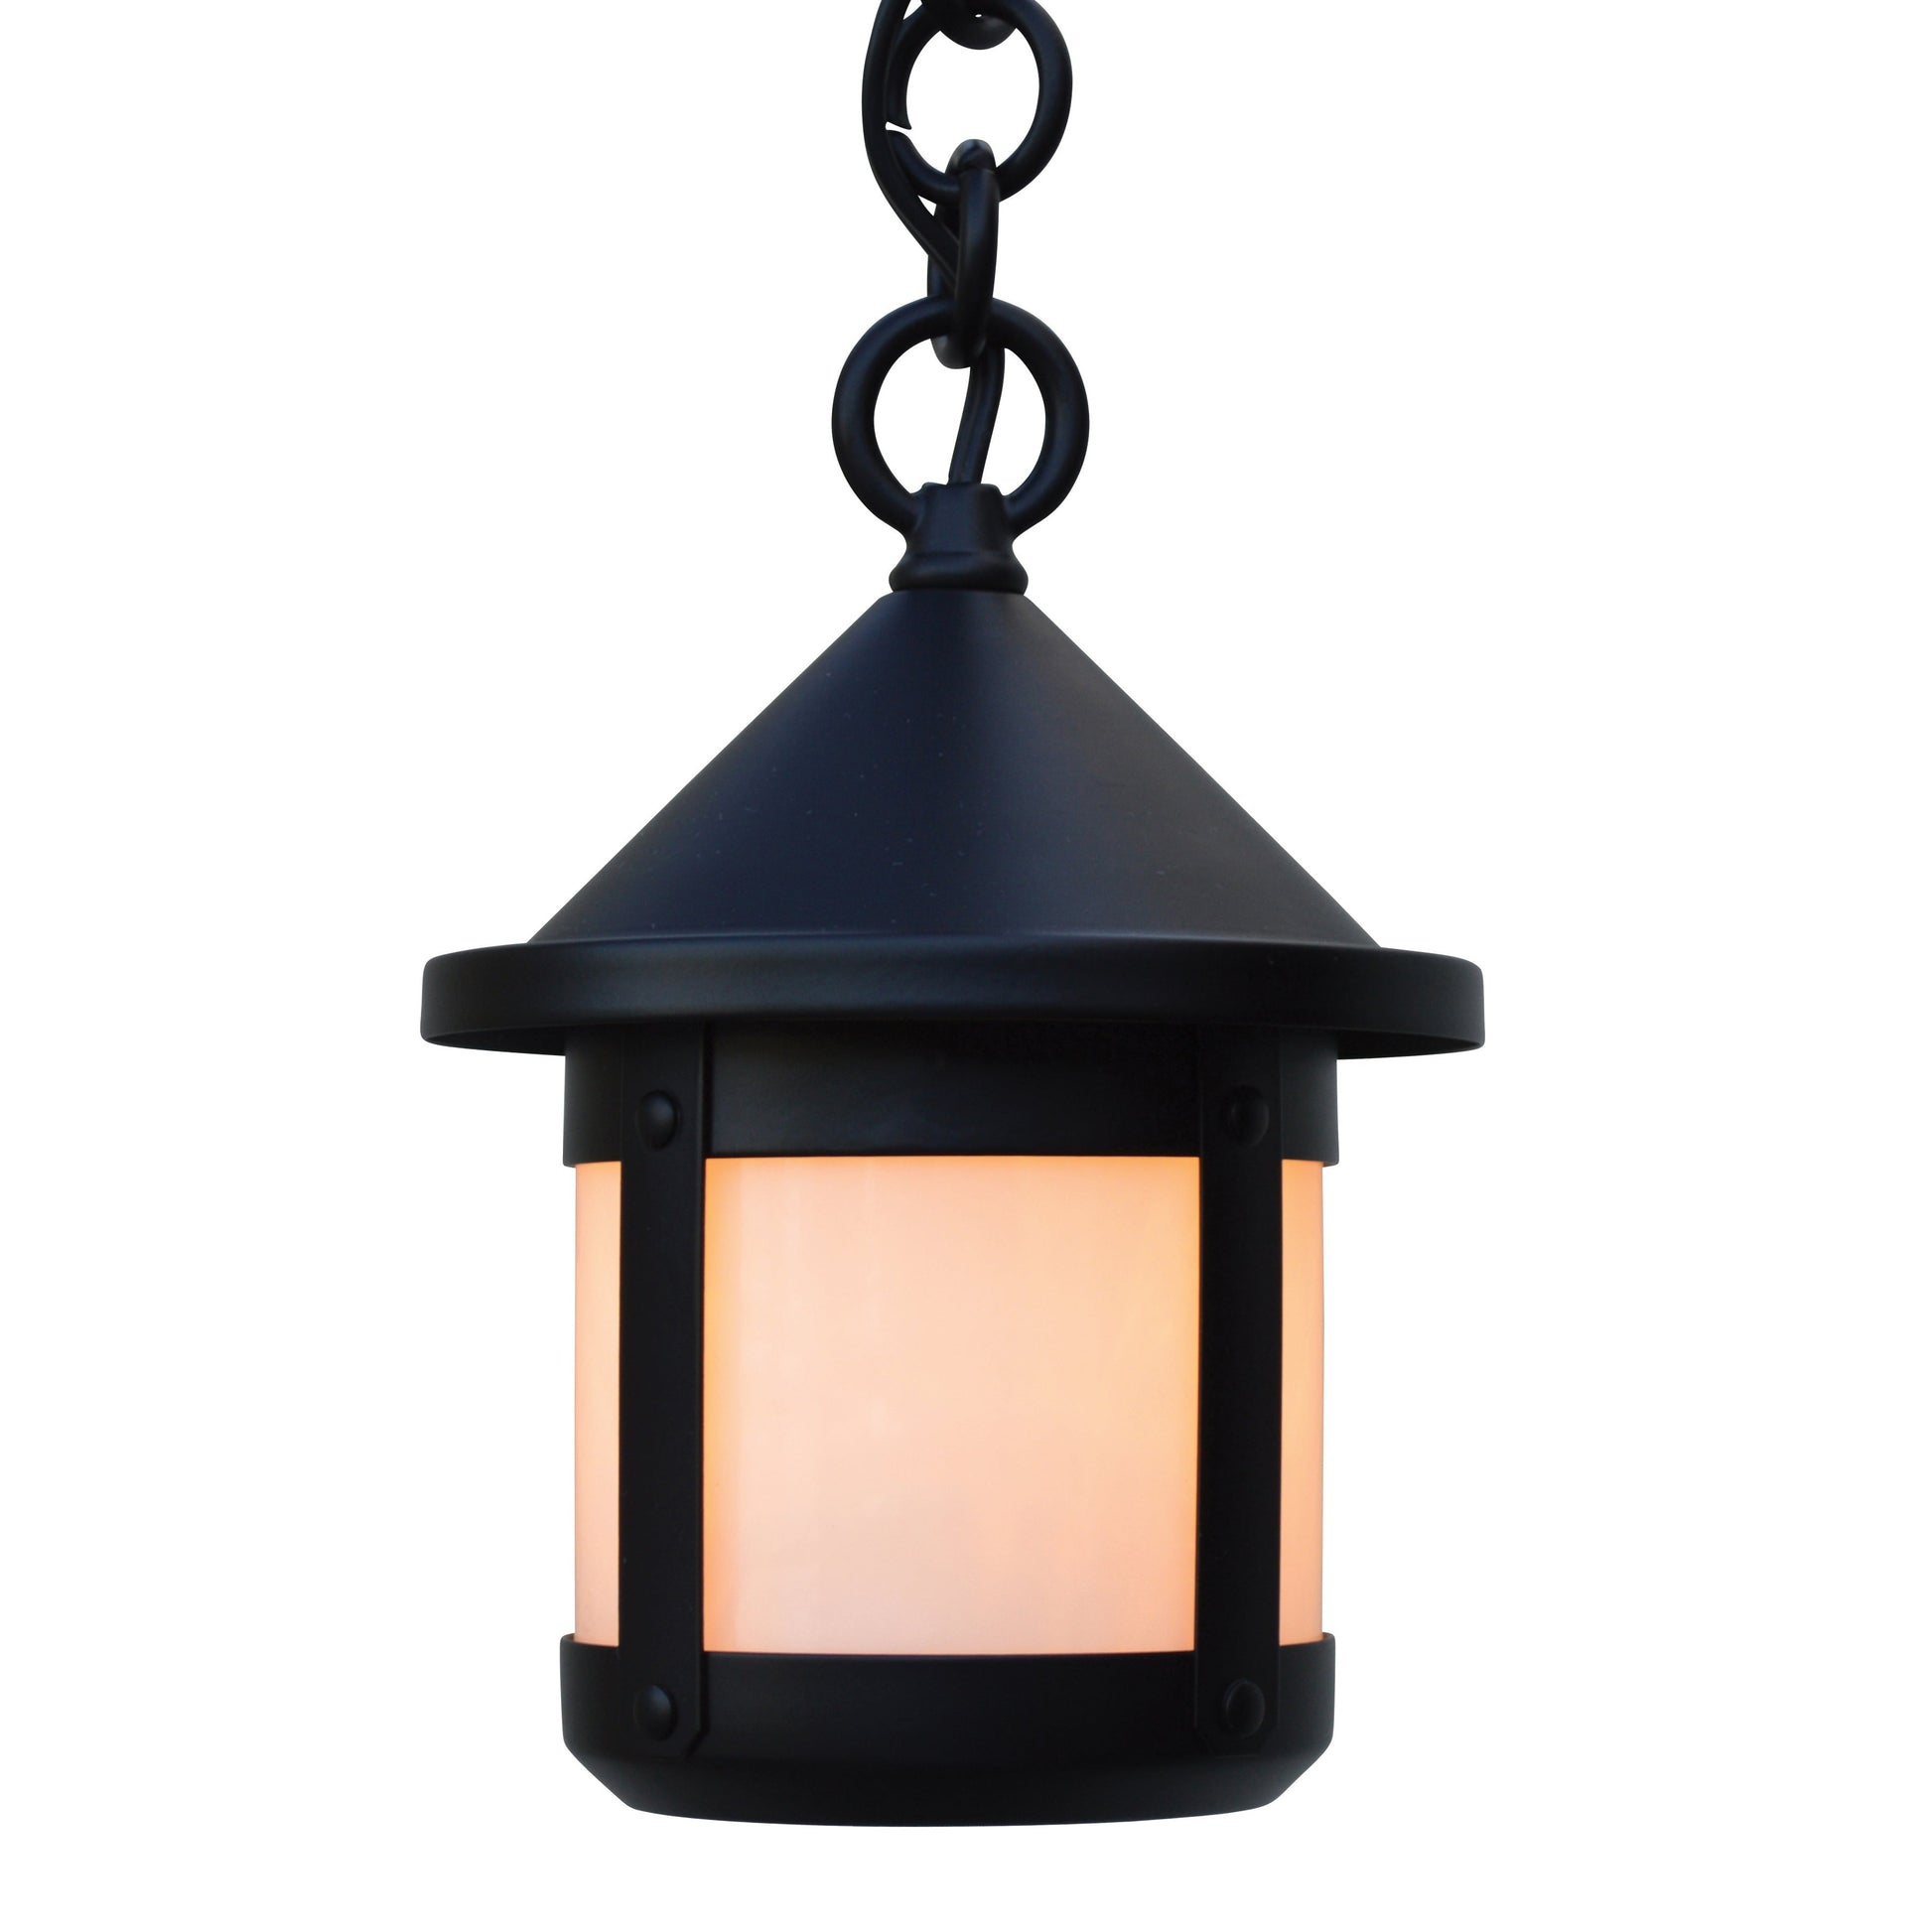 Arroyo Craftsman Berkeley 6" Mission Brown Short Body Pendant With Frosted Glass Shade